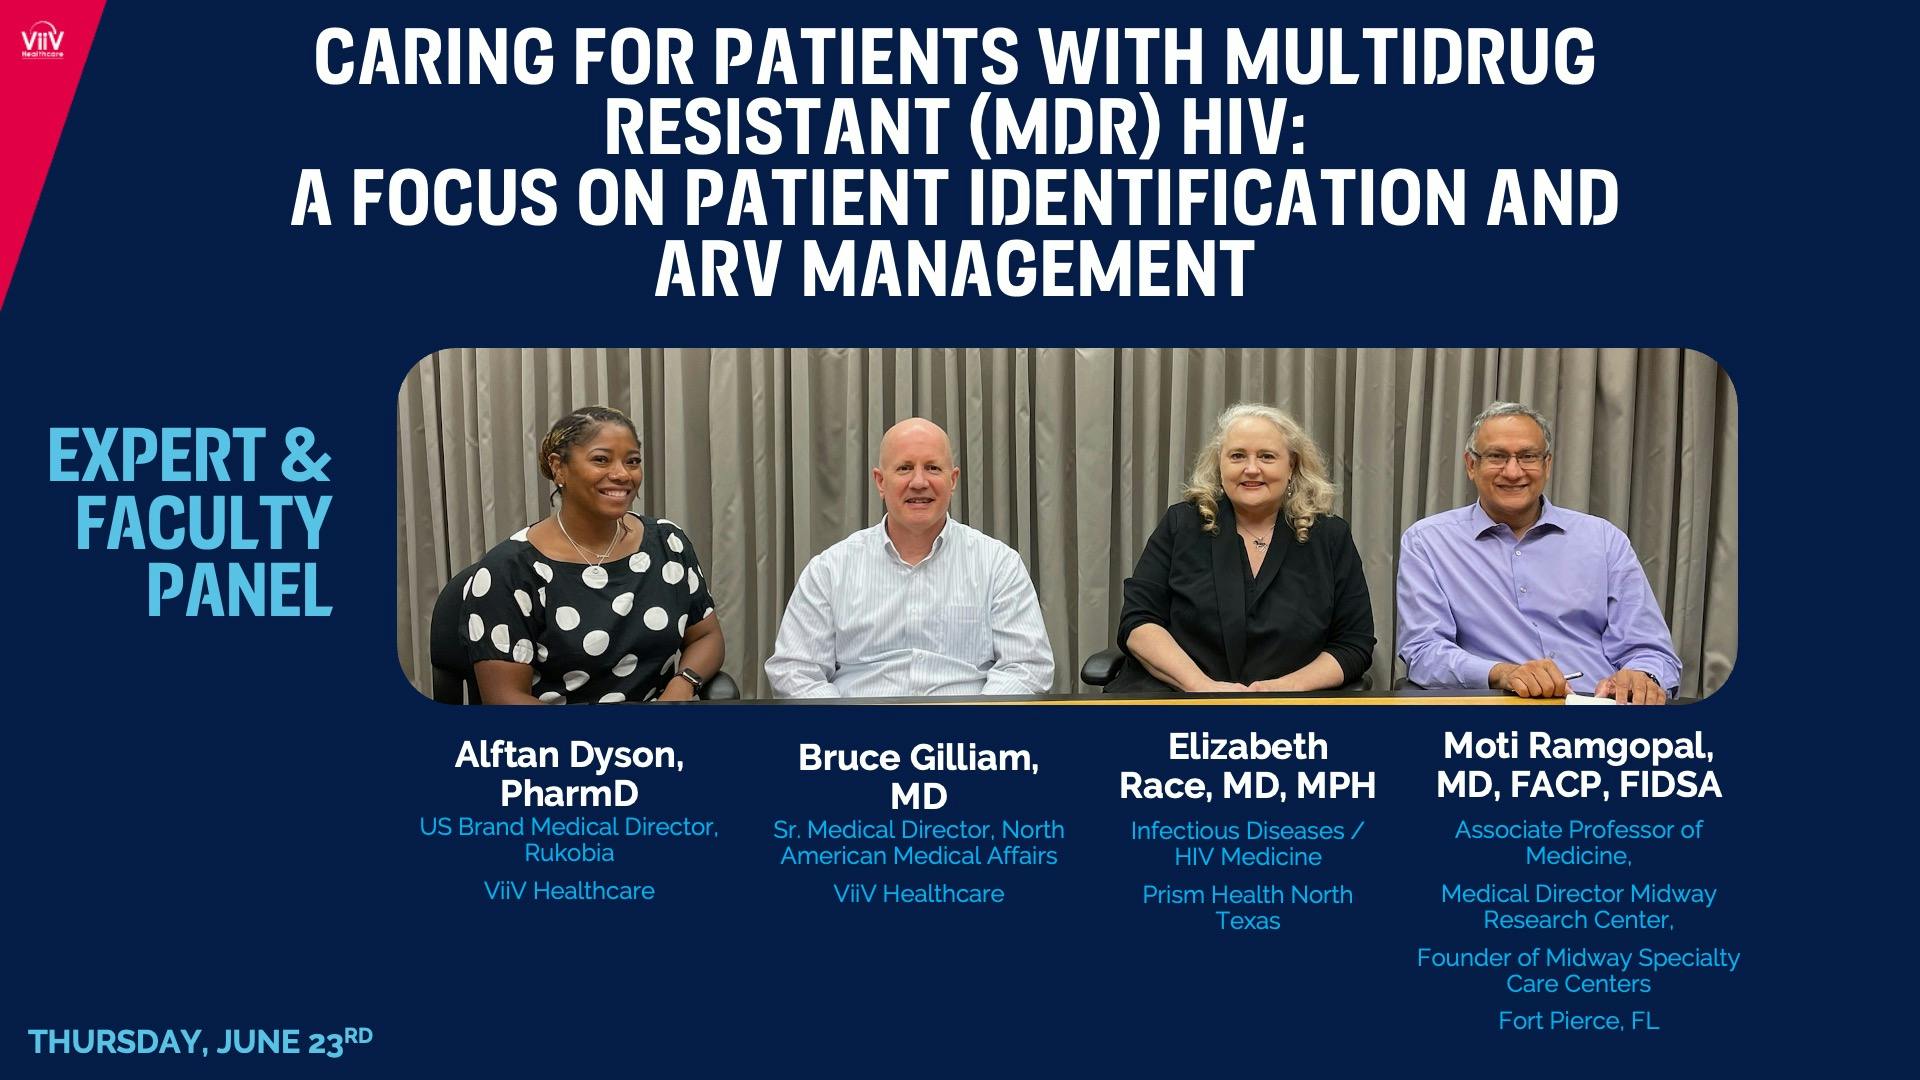 Caring for Patients with Multidrug Resistant (MDR) HIV - A Focus on Patient Identification and ARV Management with Q&A